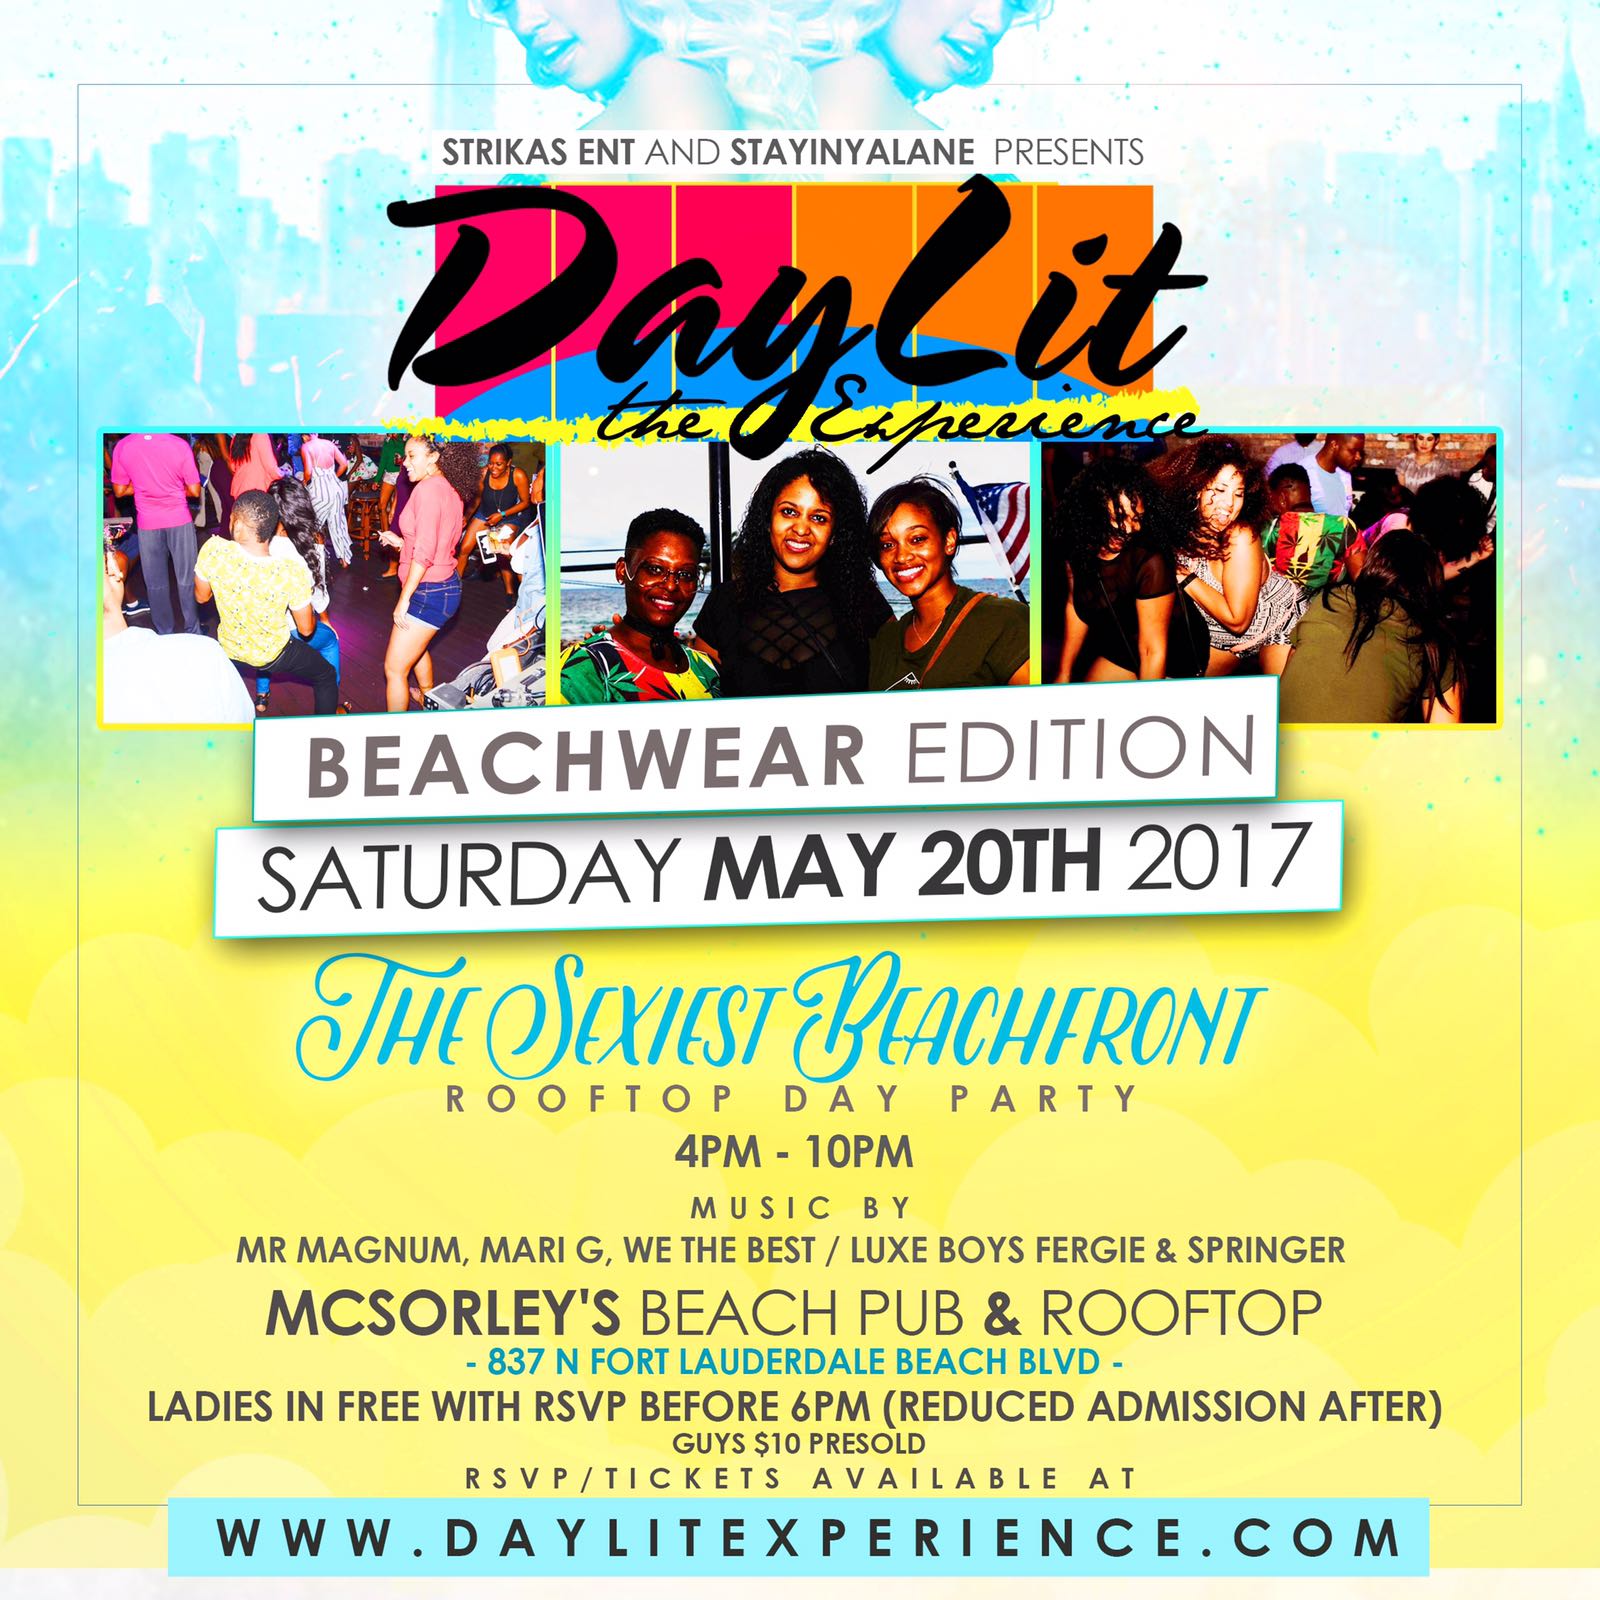 DayLit Beachwear Edition featuring Mr. Magnum, DJing in Ft. Lauderdale at McSorley's Beach Pub. Rooftop day party.